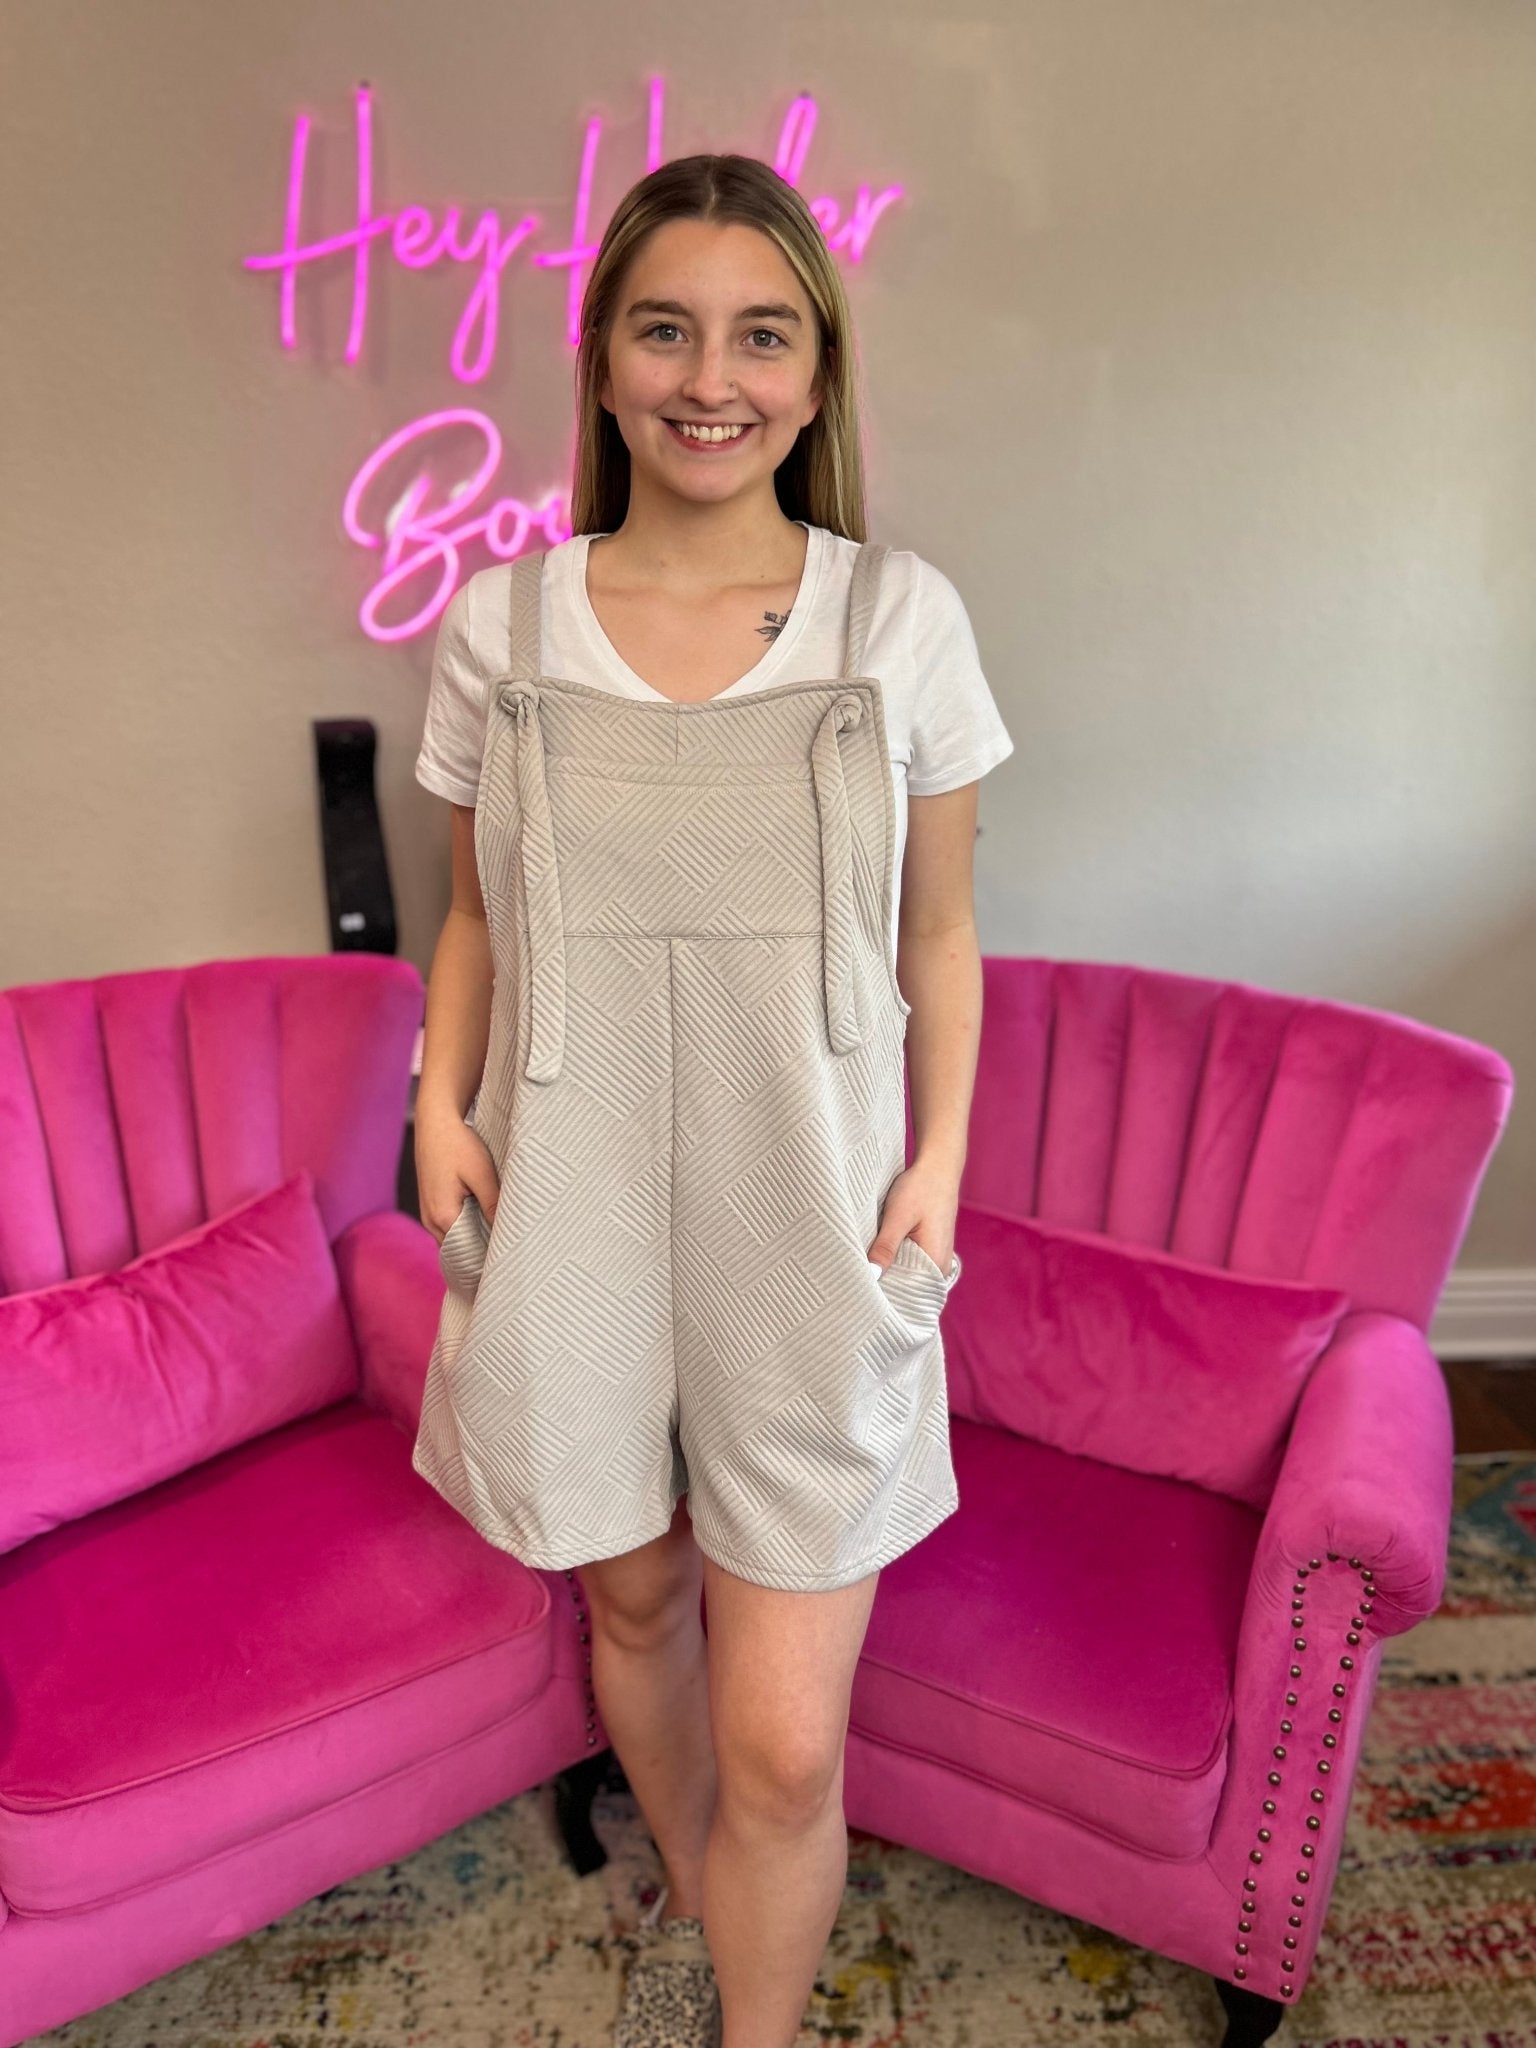 The Betsy Overalls - Hey Heifer Boutique